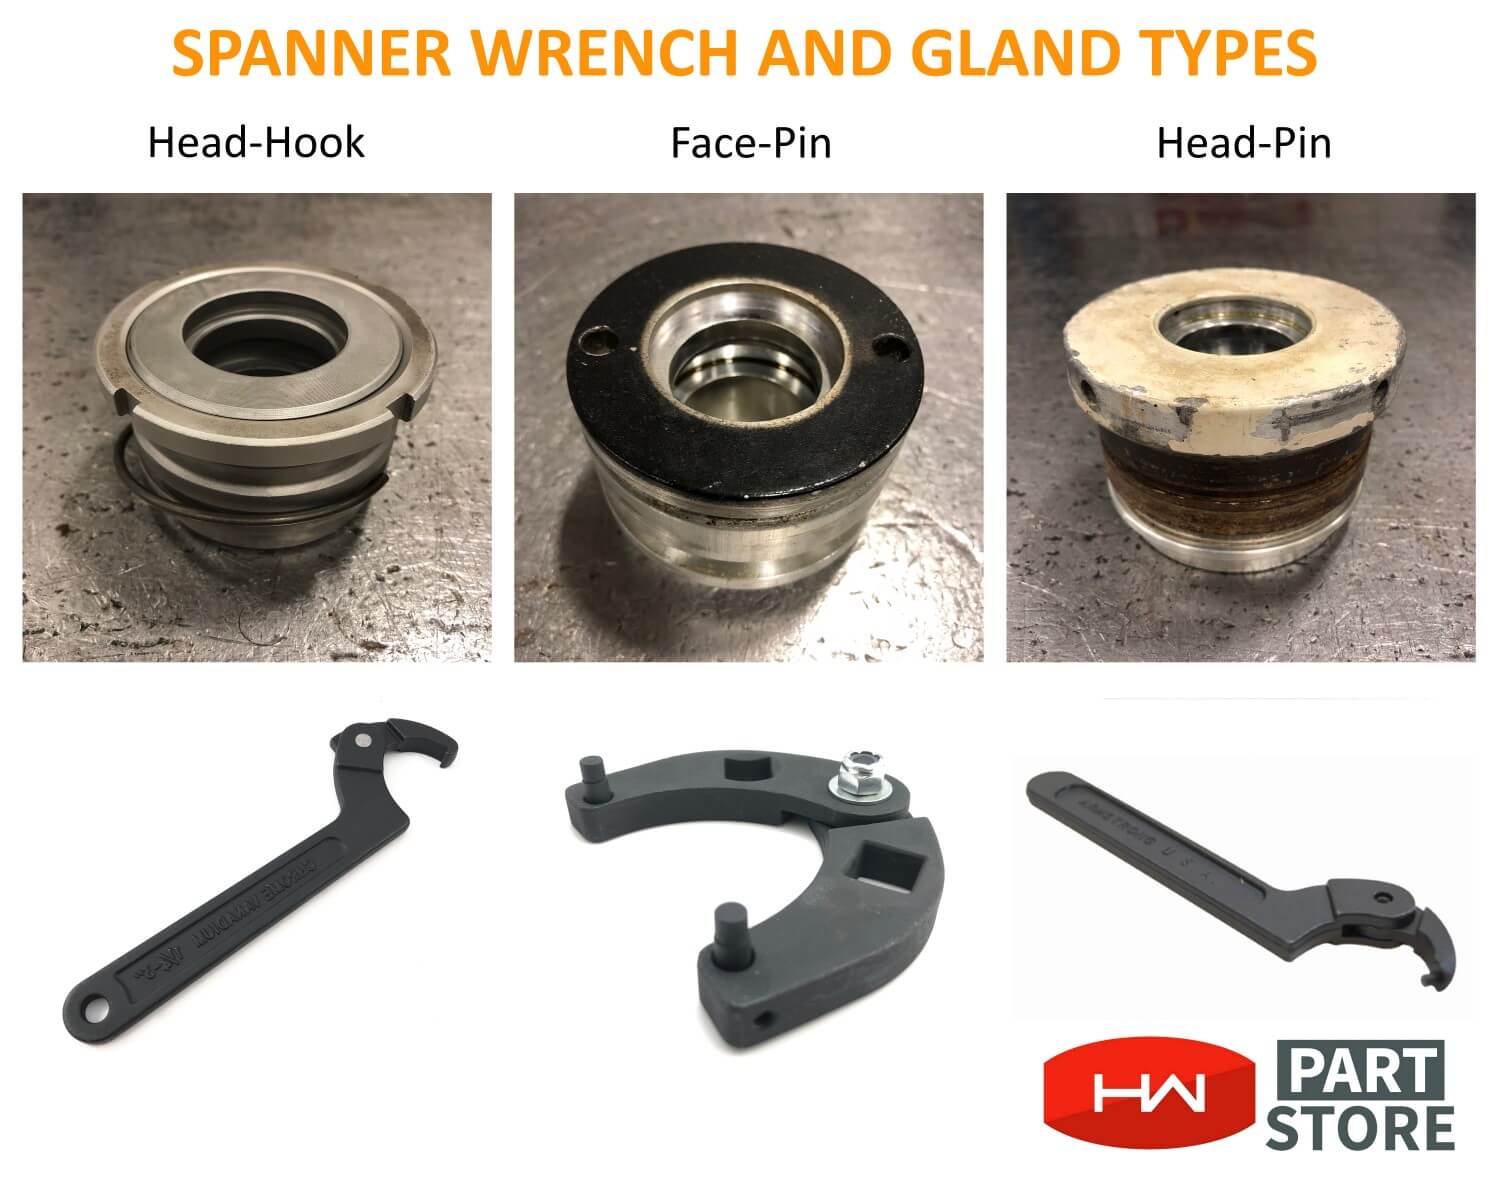 How to Choose a Spanner Wrench for Your Cylinder